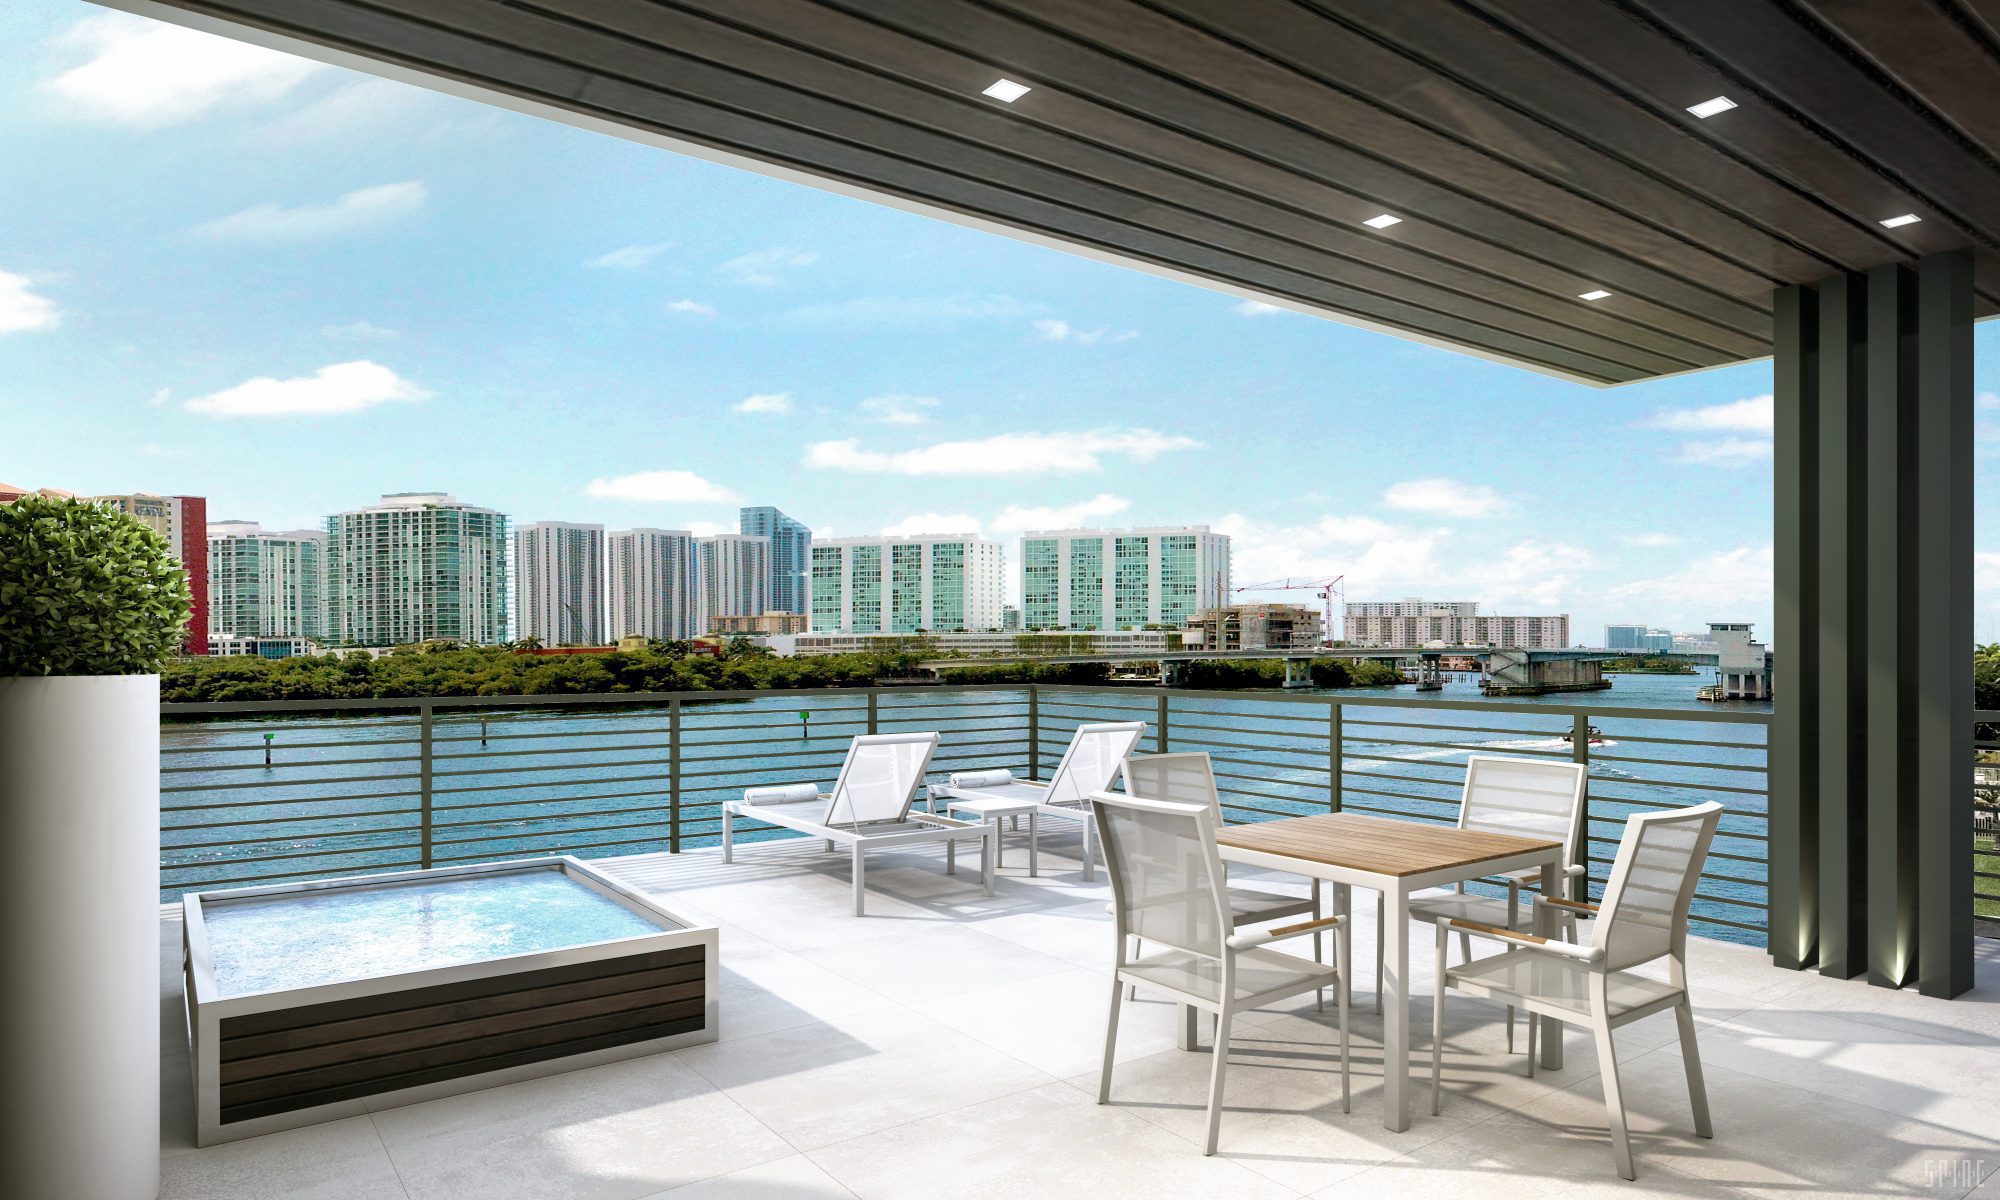 Cypress Rooftop Koya Bay Rendering of patio with furniture and box of water on display